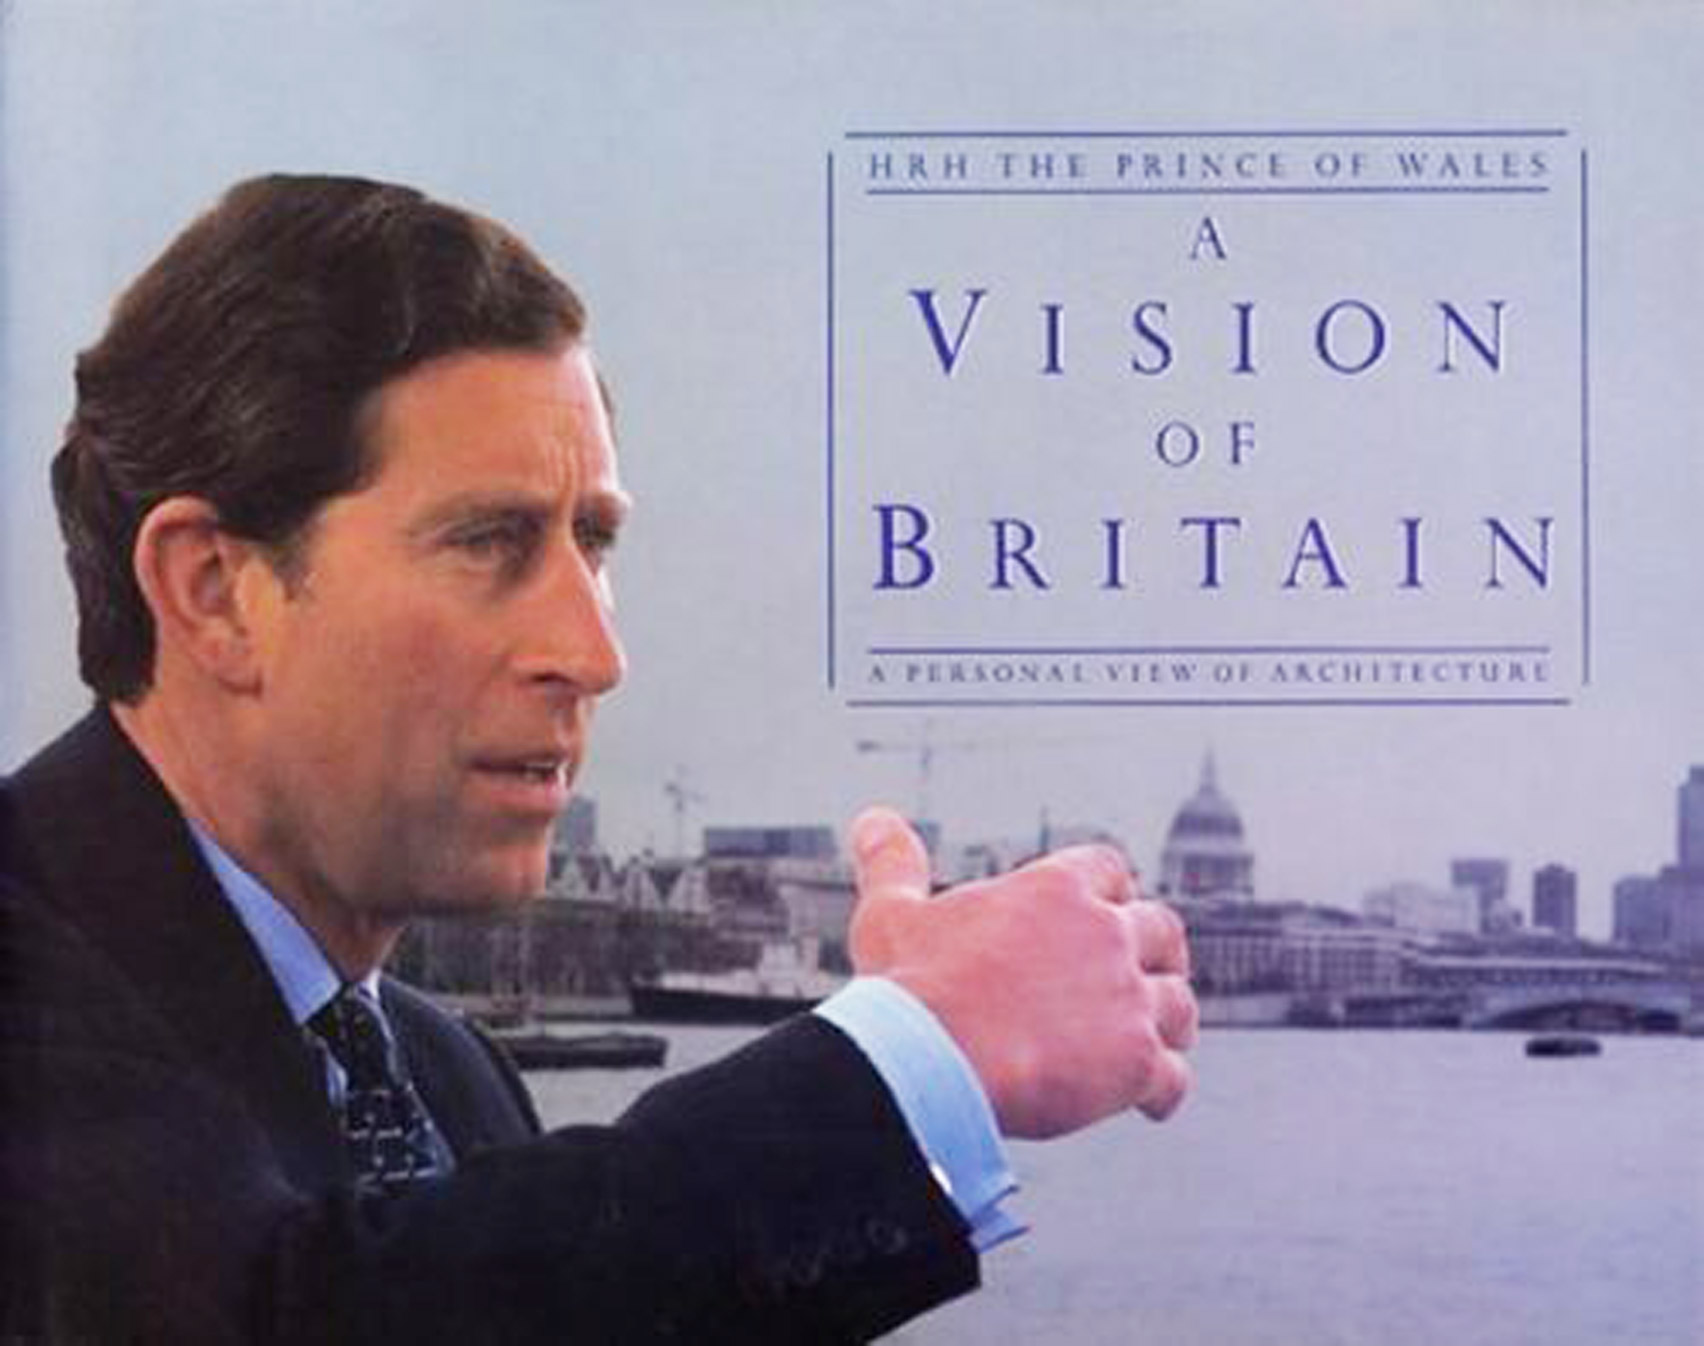 A vision of Britain book by King Charles III 